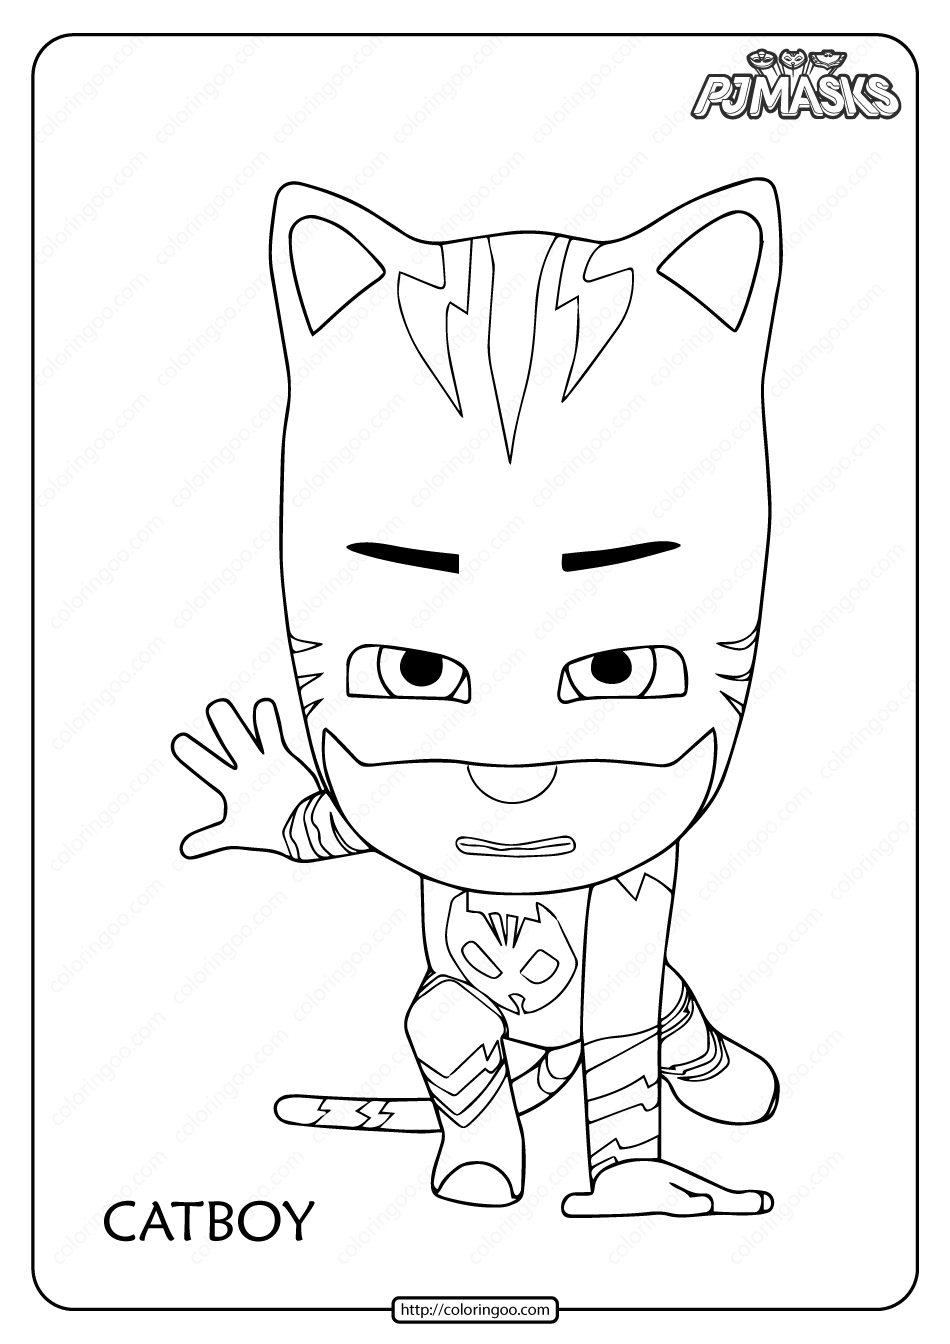 free printable pj masks catboy coloring pages